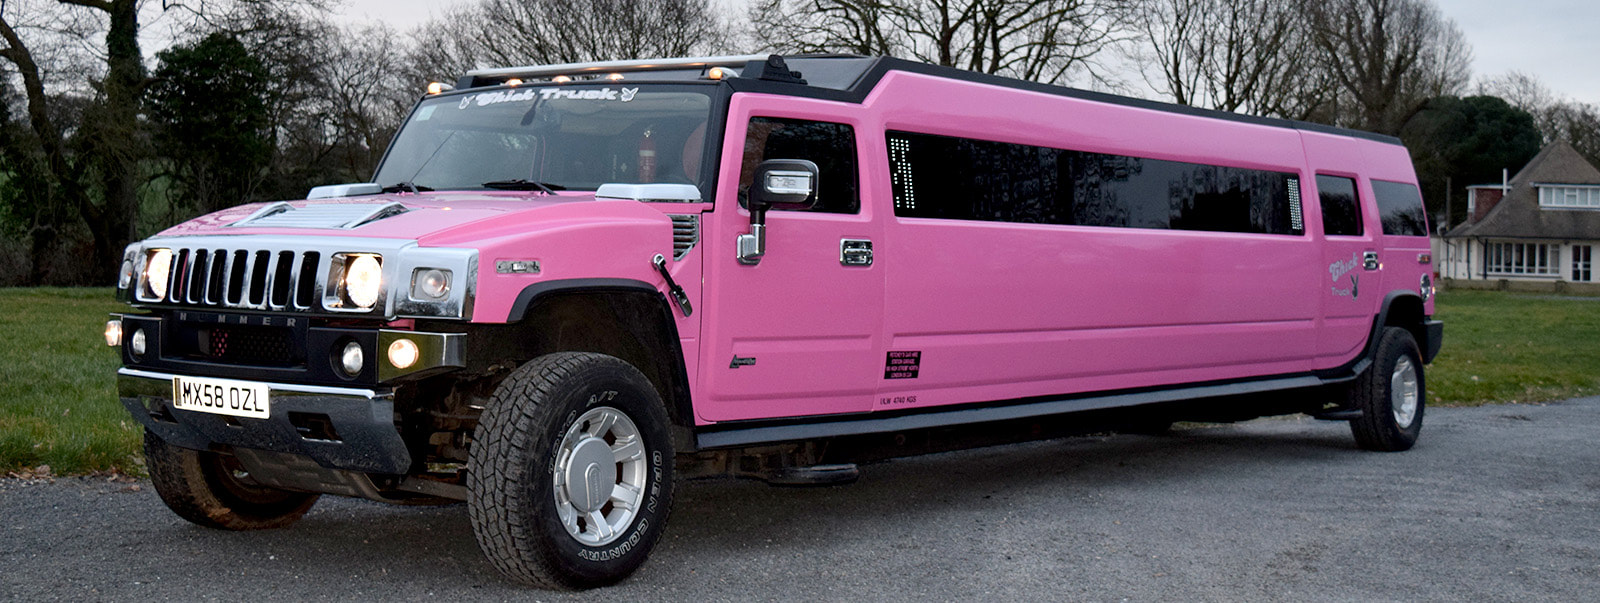 Pink Hummer Limo Hire Oldham